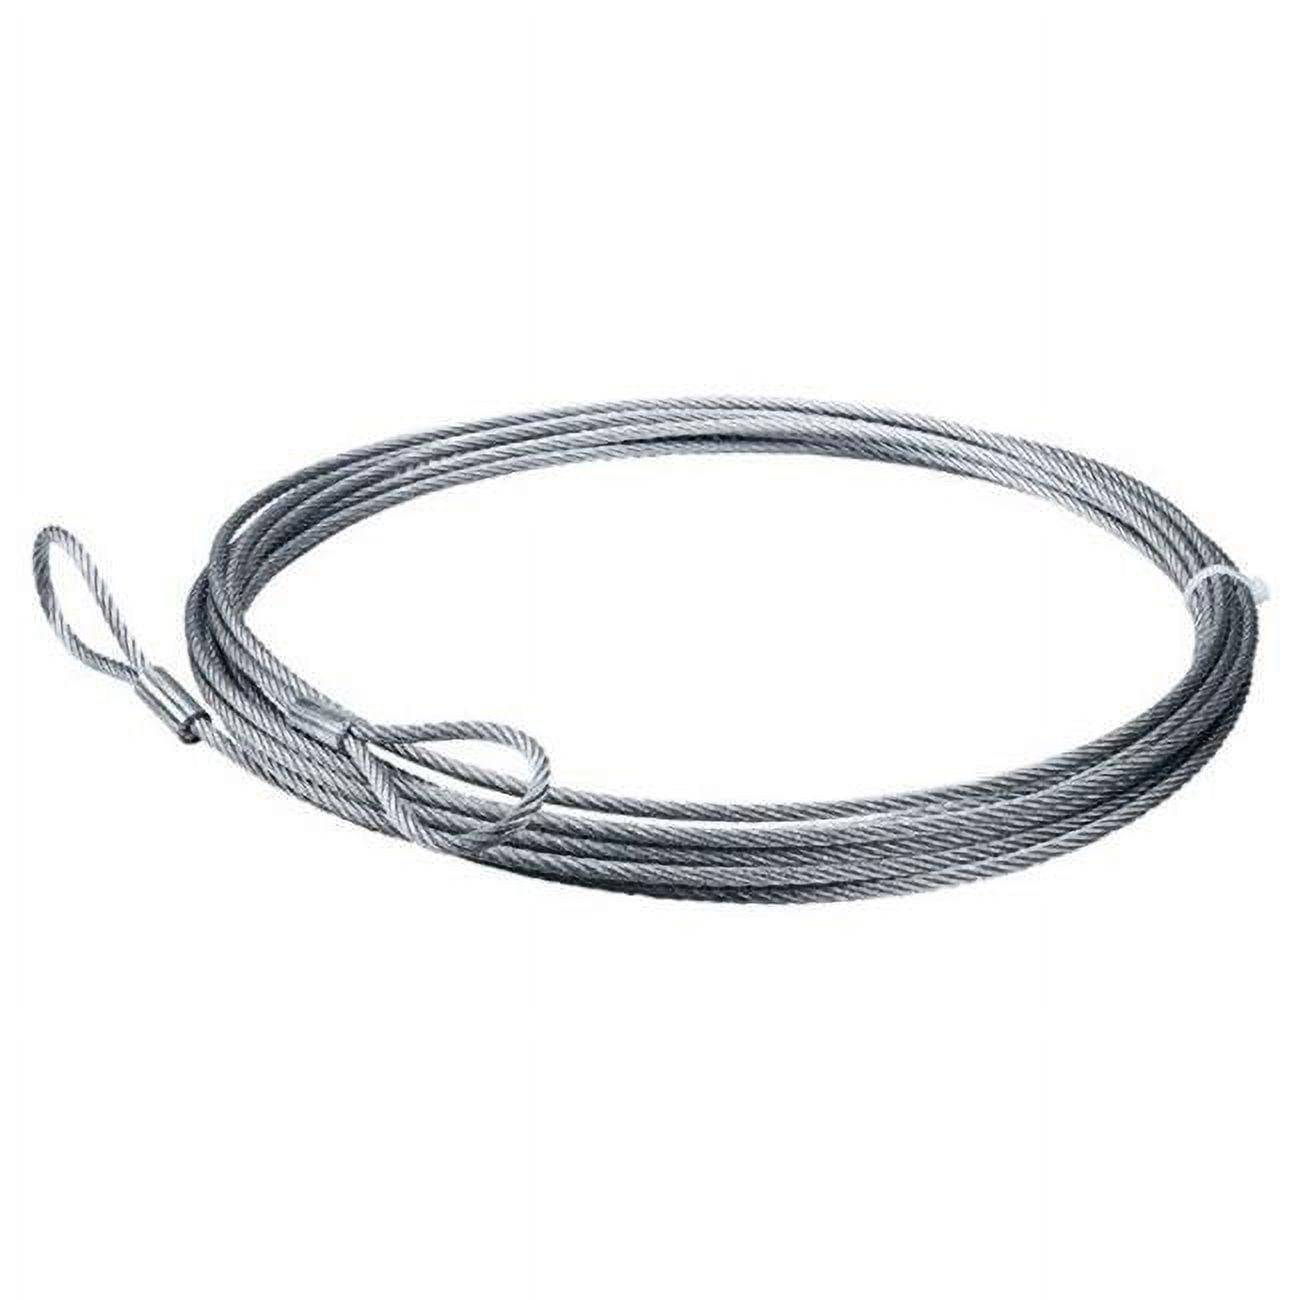 Winch Cable Extension - Galvanized - 3/8 X 50 (14 400lb Strength) (4x4 Vehicle Recovery)